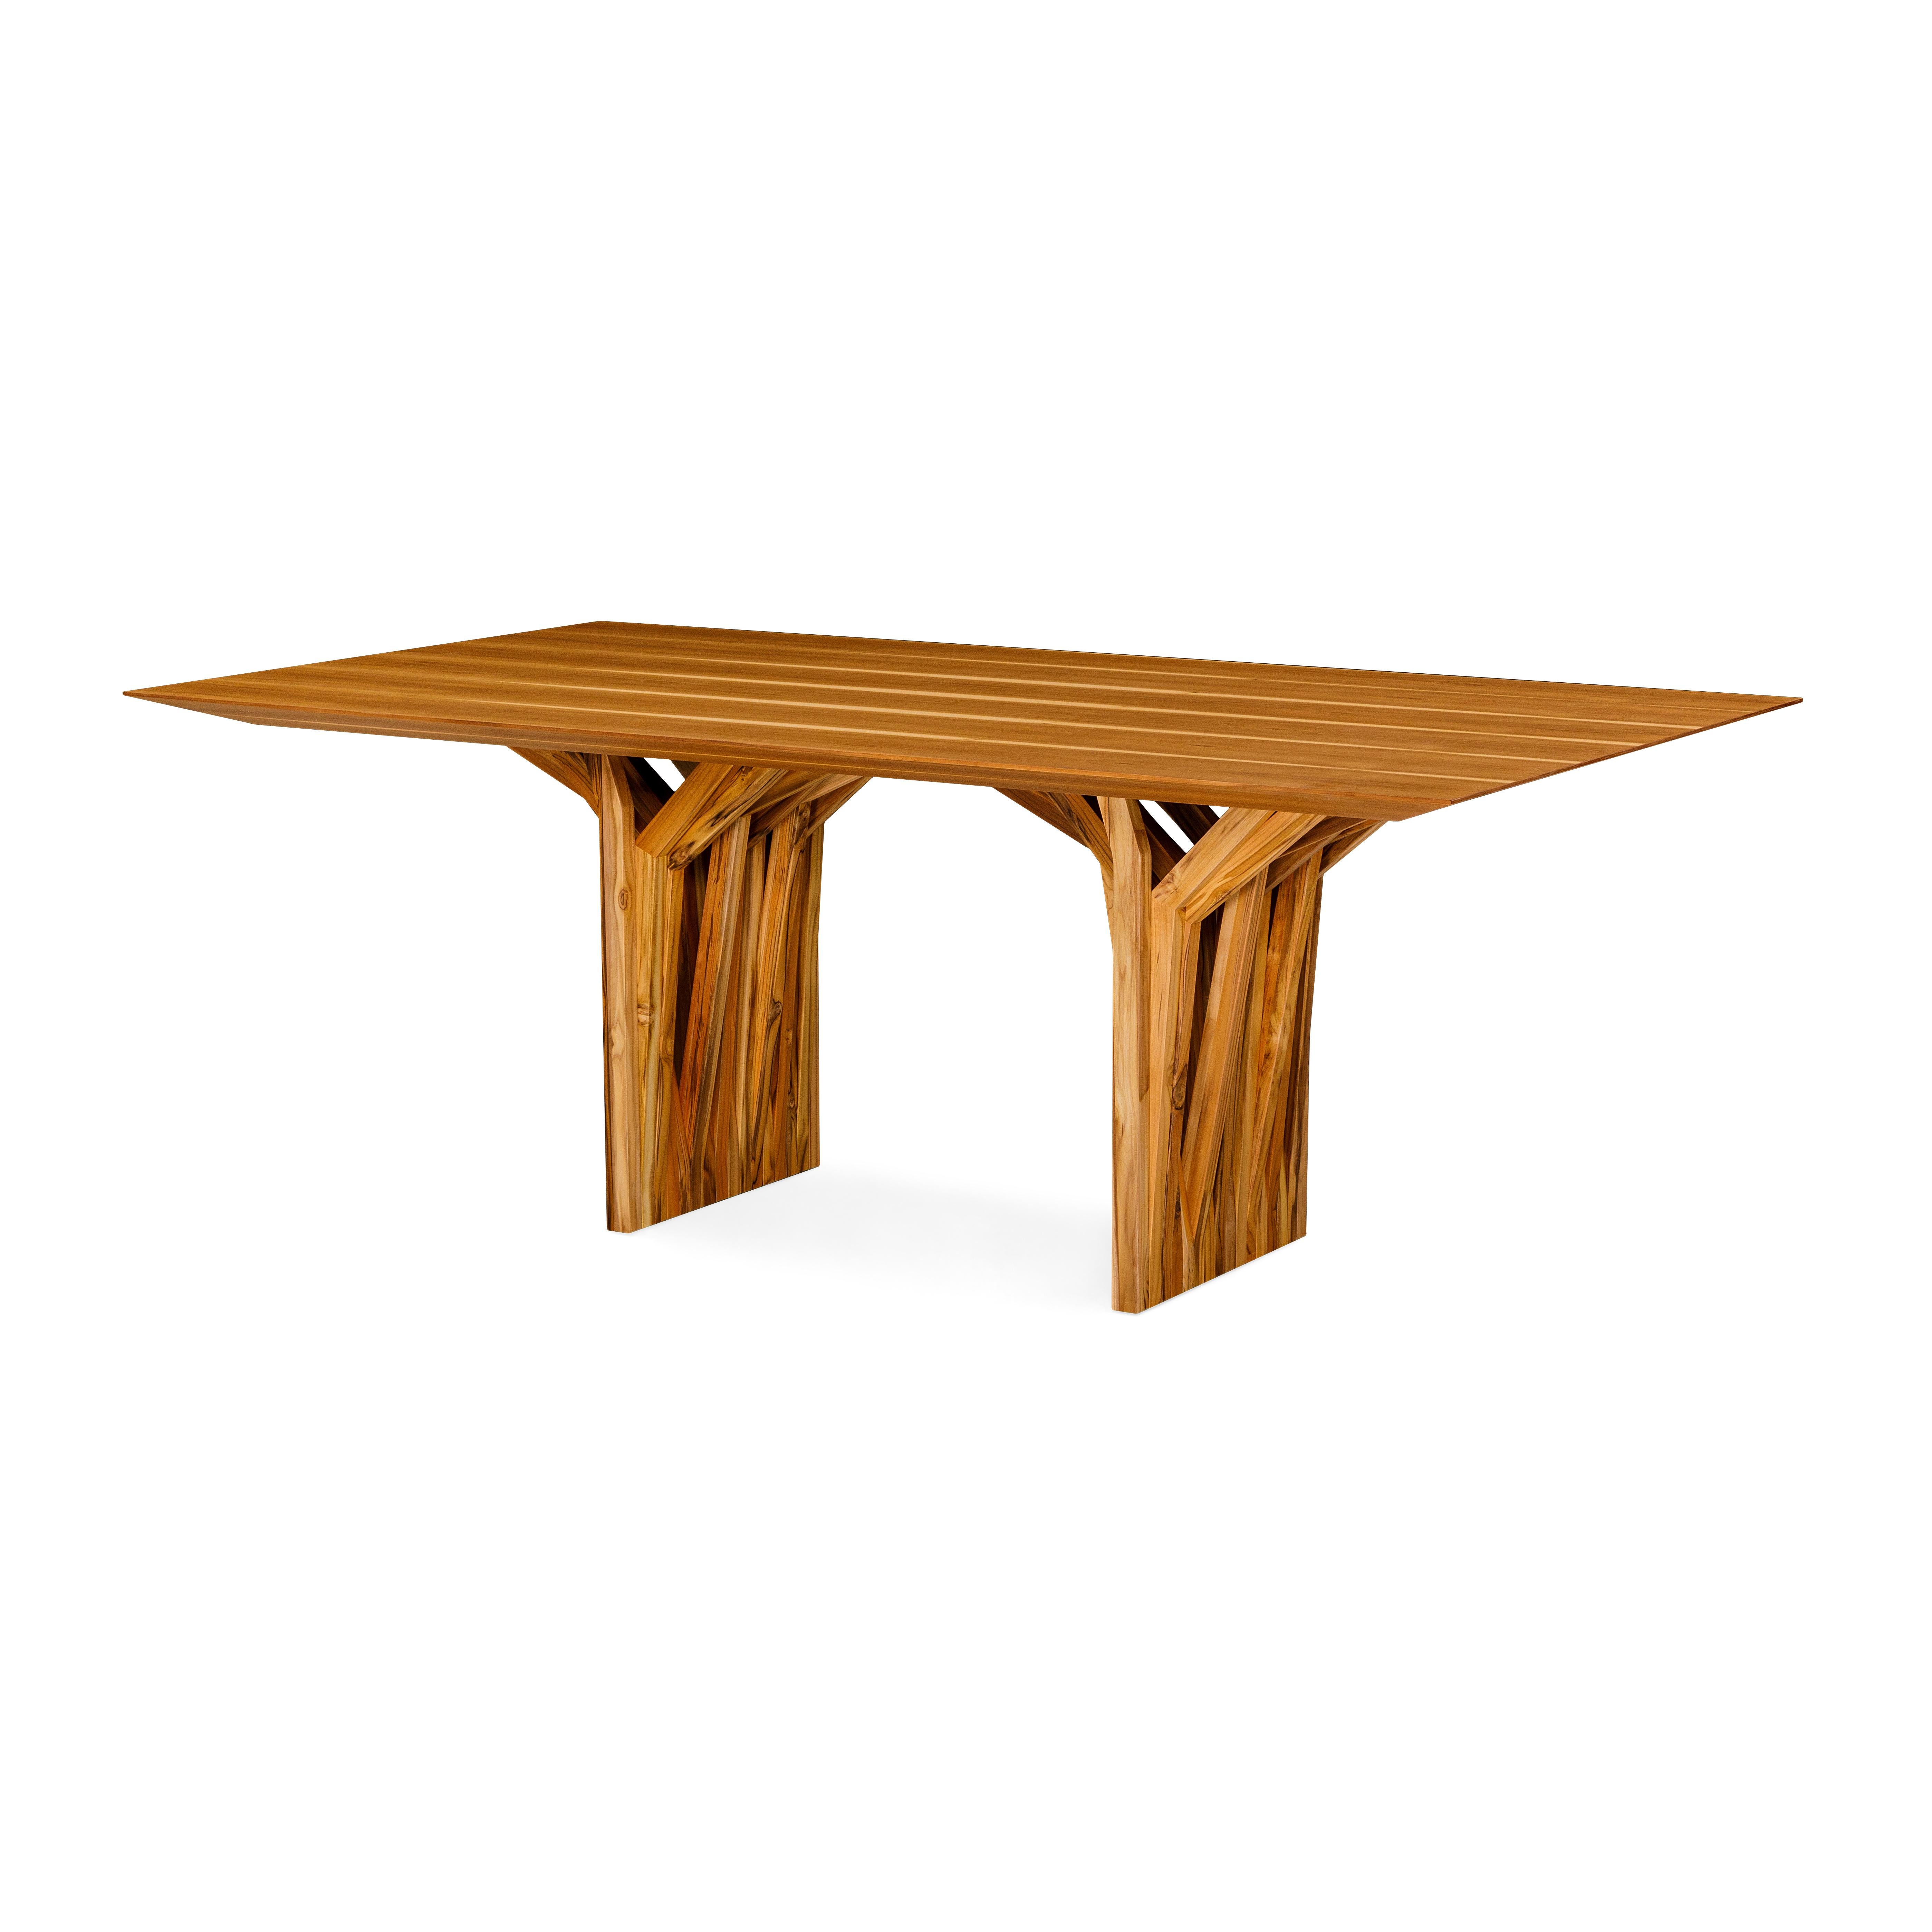 The Radi dining table is this masterpiece in a teak finish wood veneer top and an original roofing anchor table base, inspired by the aerial roots of trees. This dining table is a very simple piece that the Uultis team has created with materials and